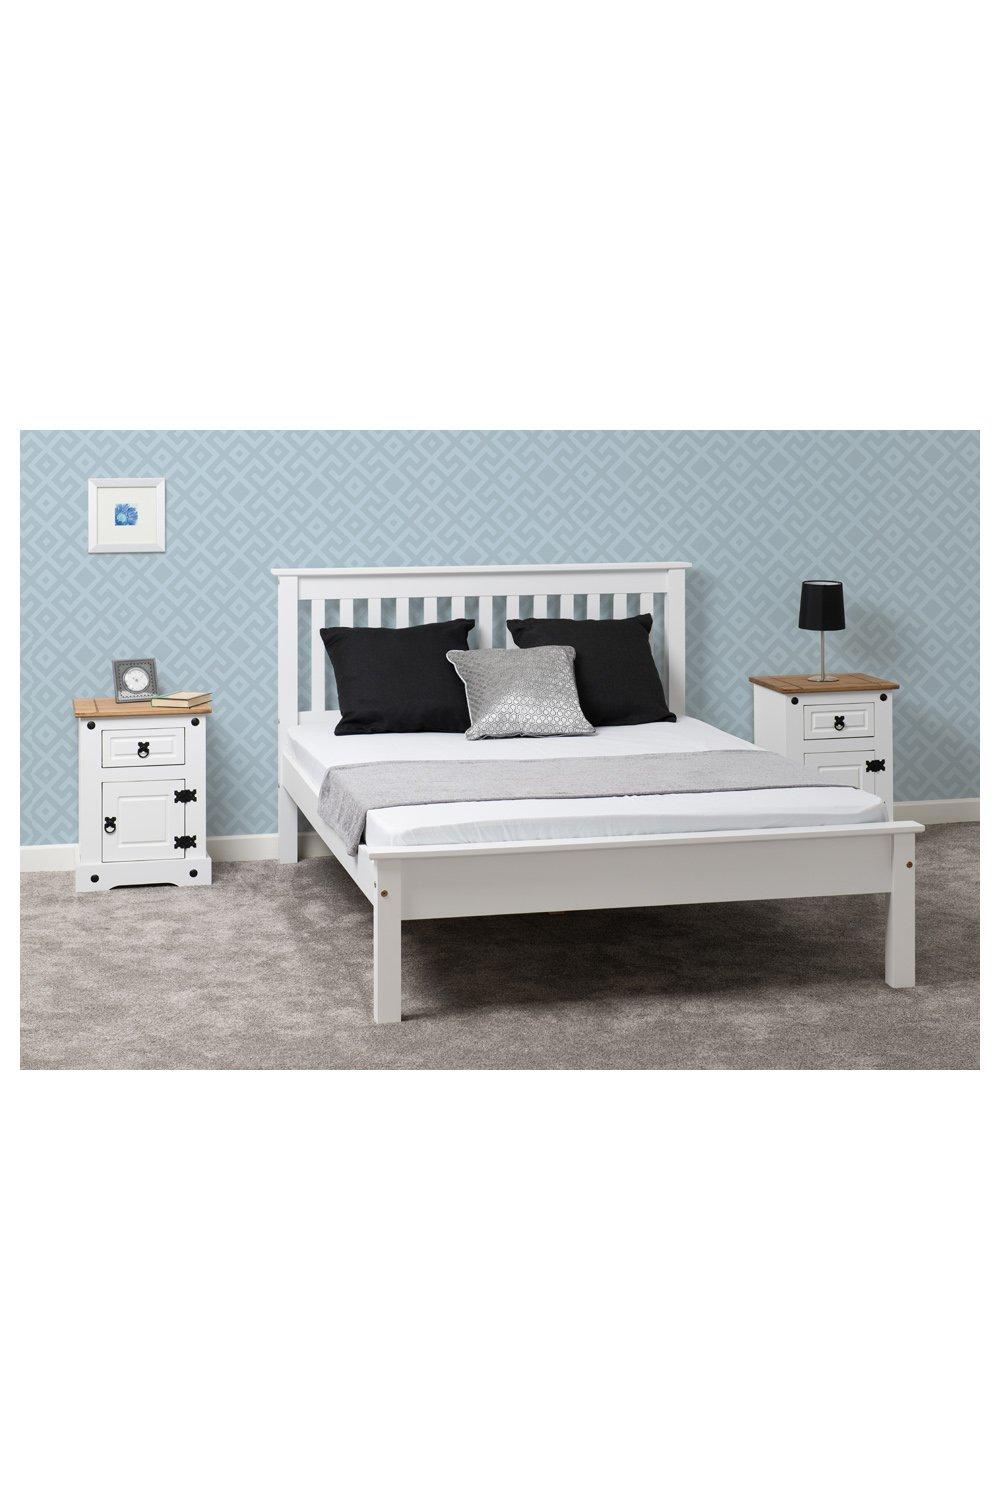 Monaco 5' King Bed Low Foot End